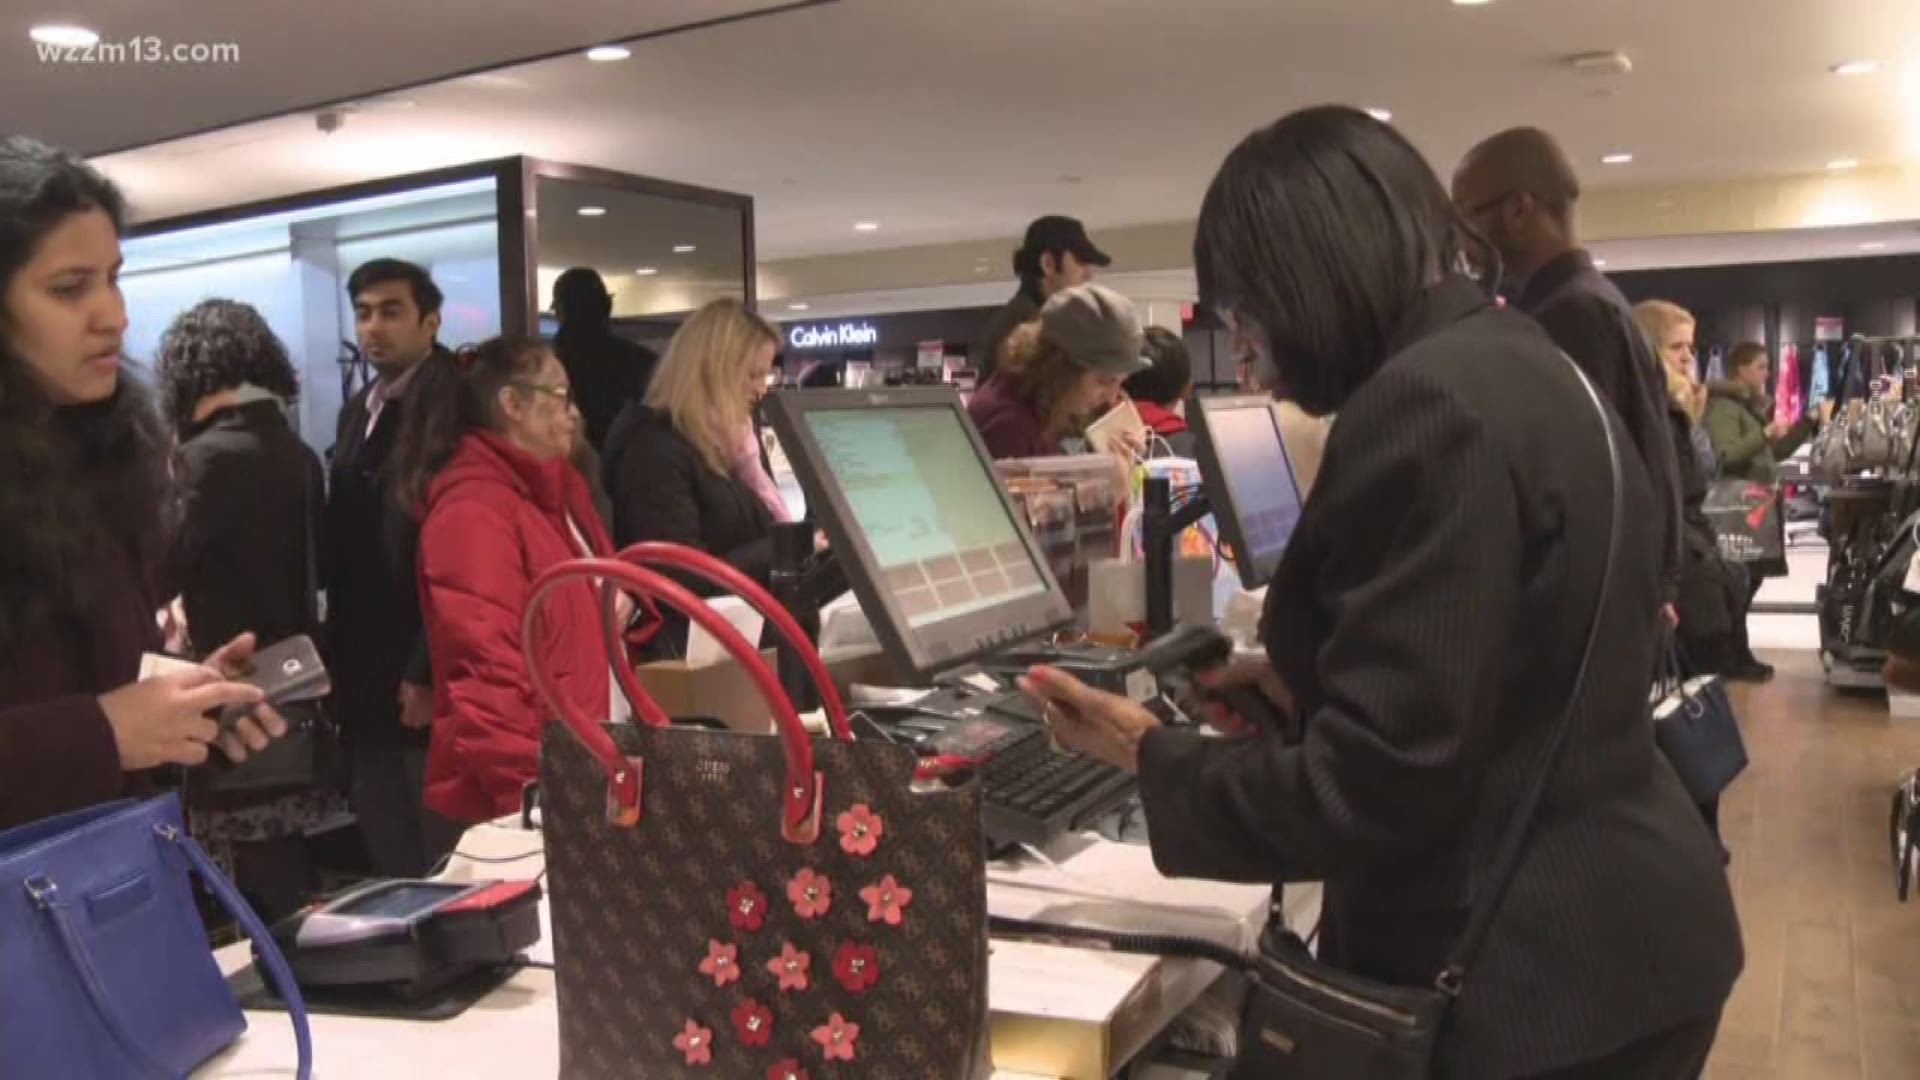 13 ON YOUR SIDE's Angela Cunningham talks last minute Christmas shopping just days before the holiday.